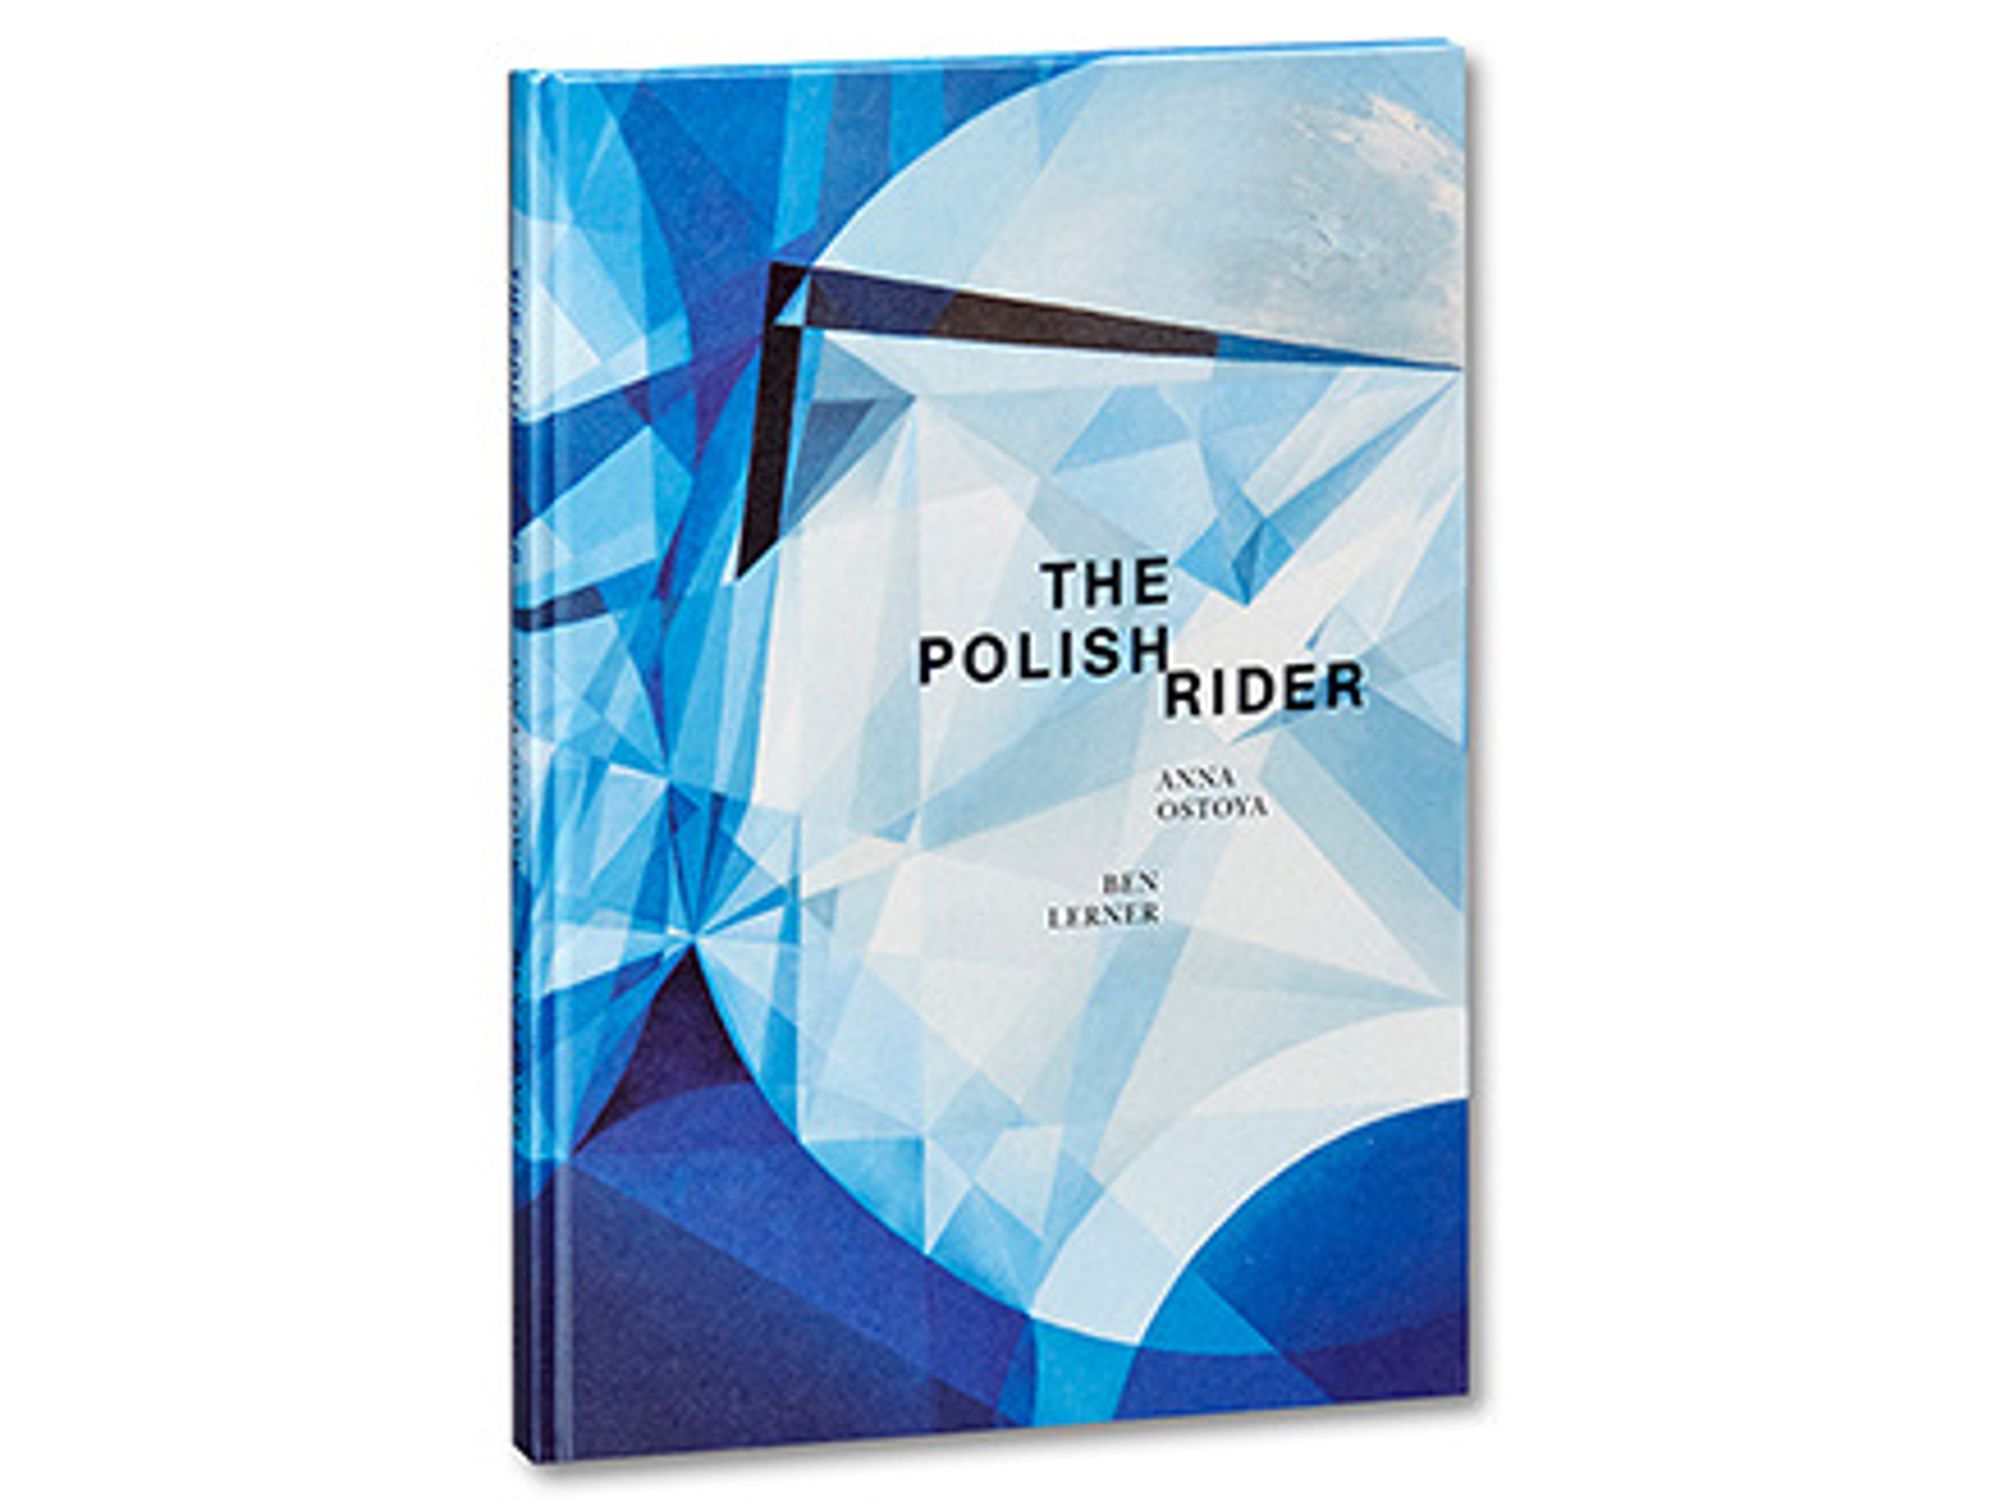 Book cover on plain background with title of The Polish Rider